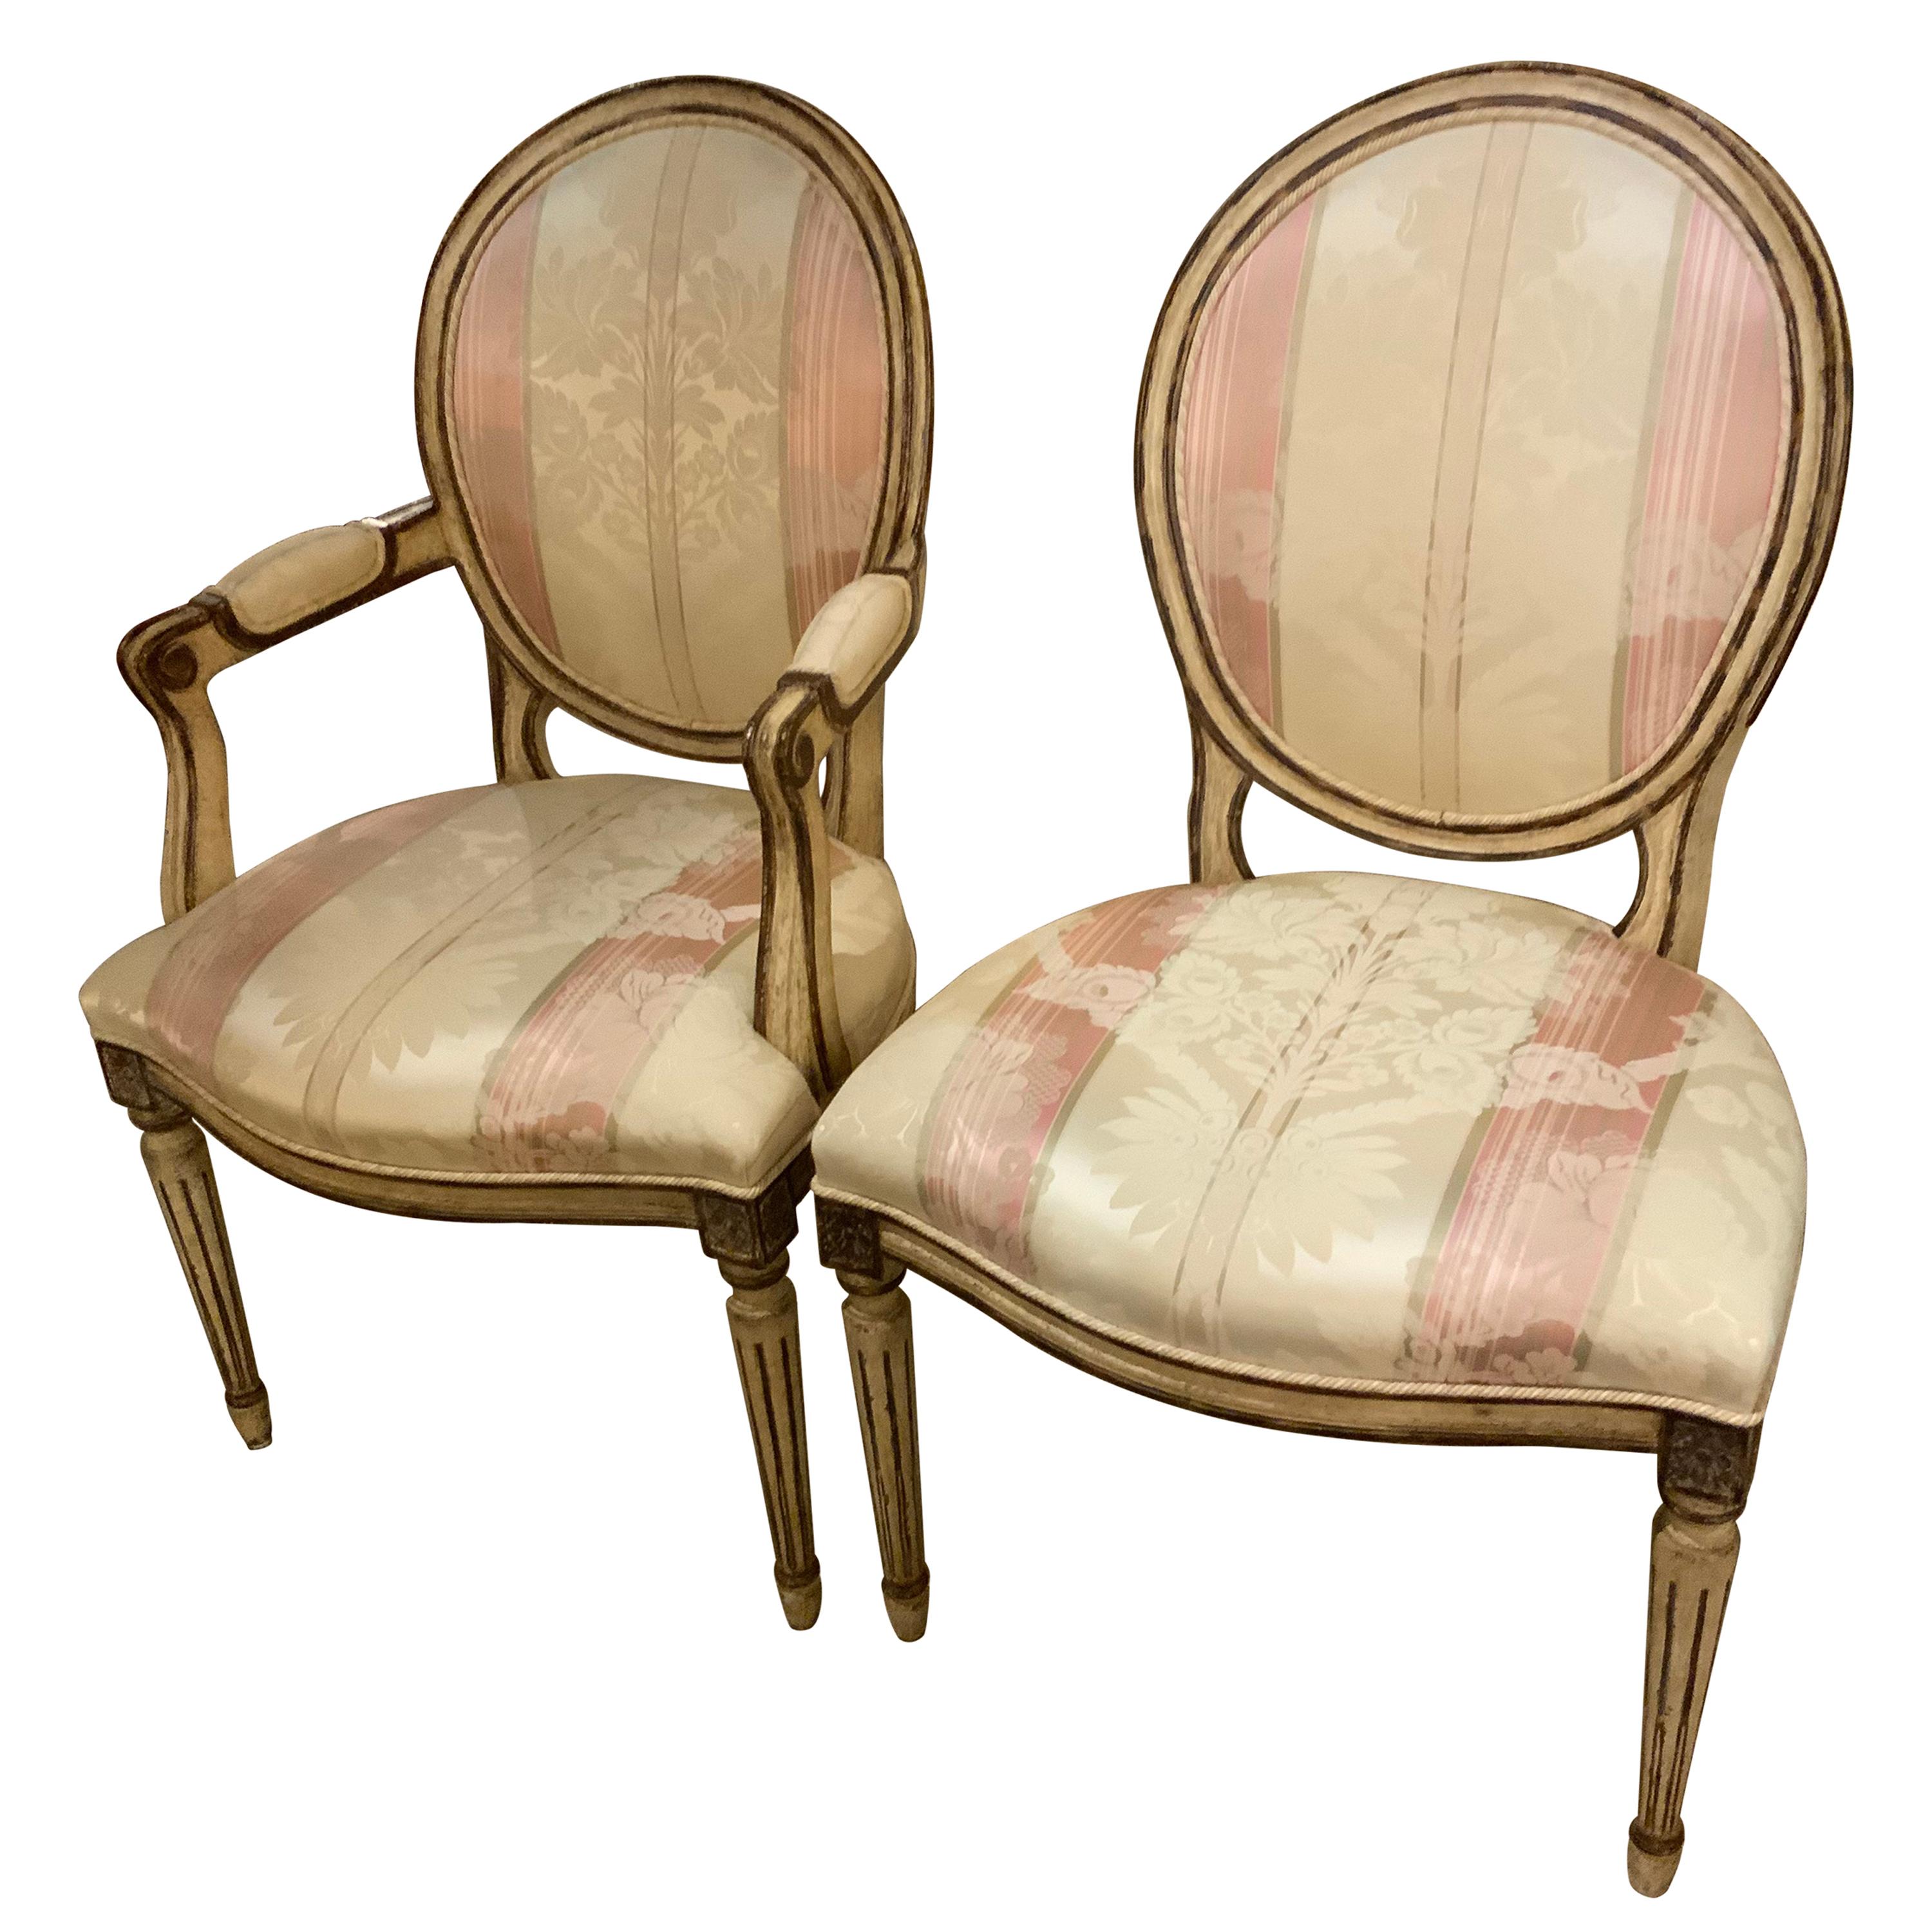 Set of 12/French Louis XVI-Style Dining Chairs, Faux Painted Cream and Bronze